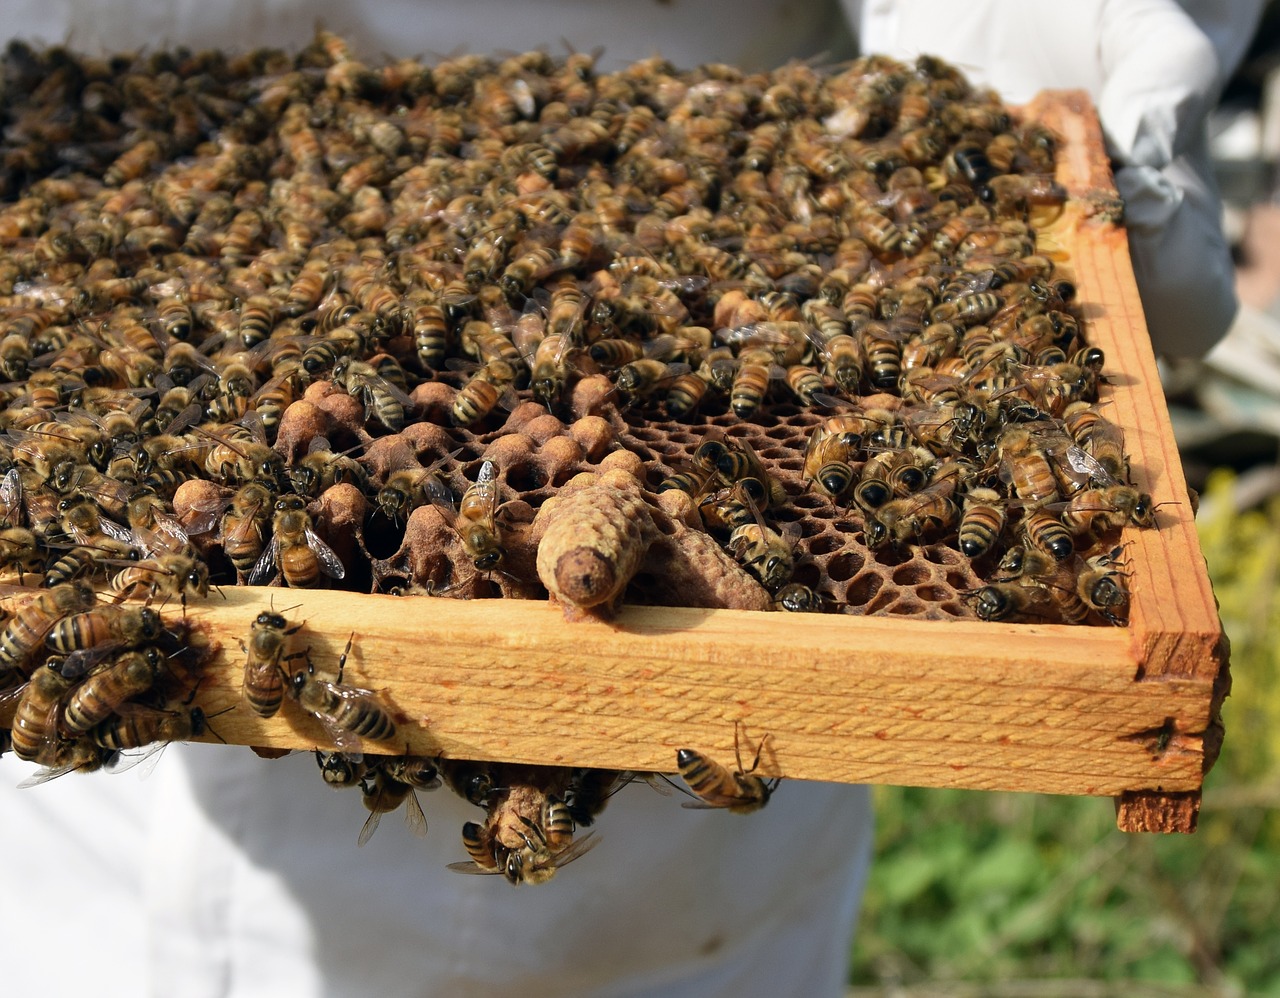 queen cell capped honeybee free photo